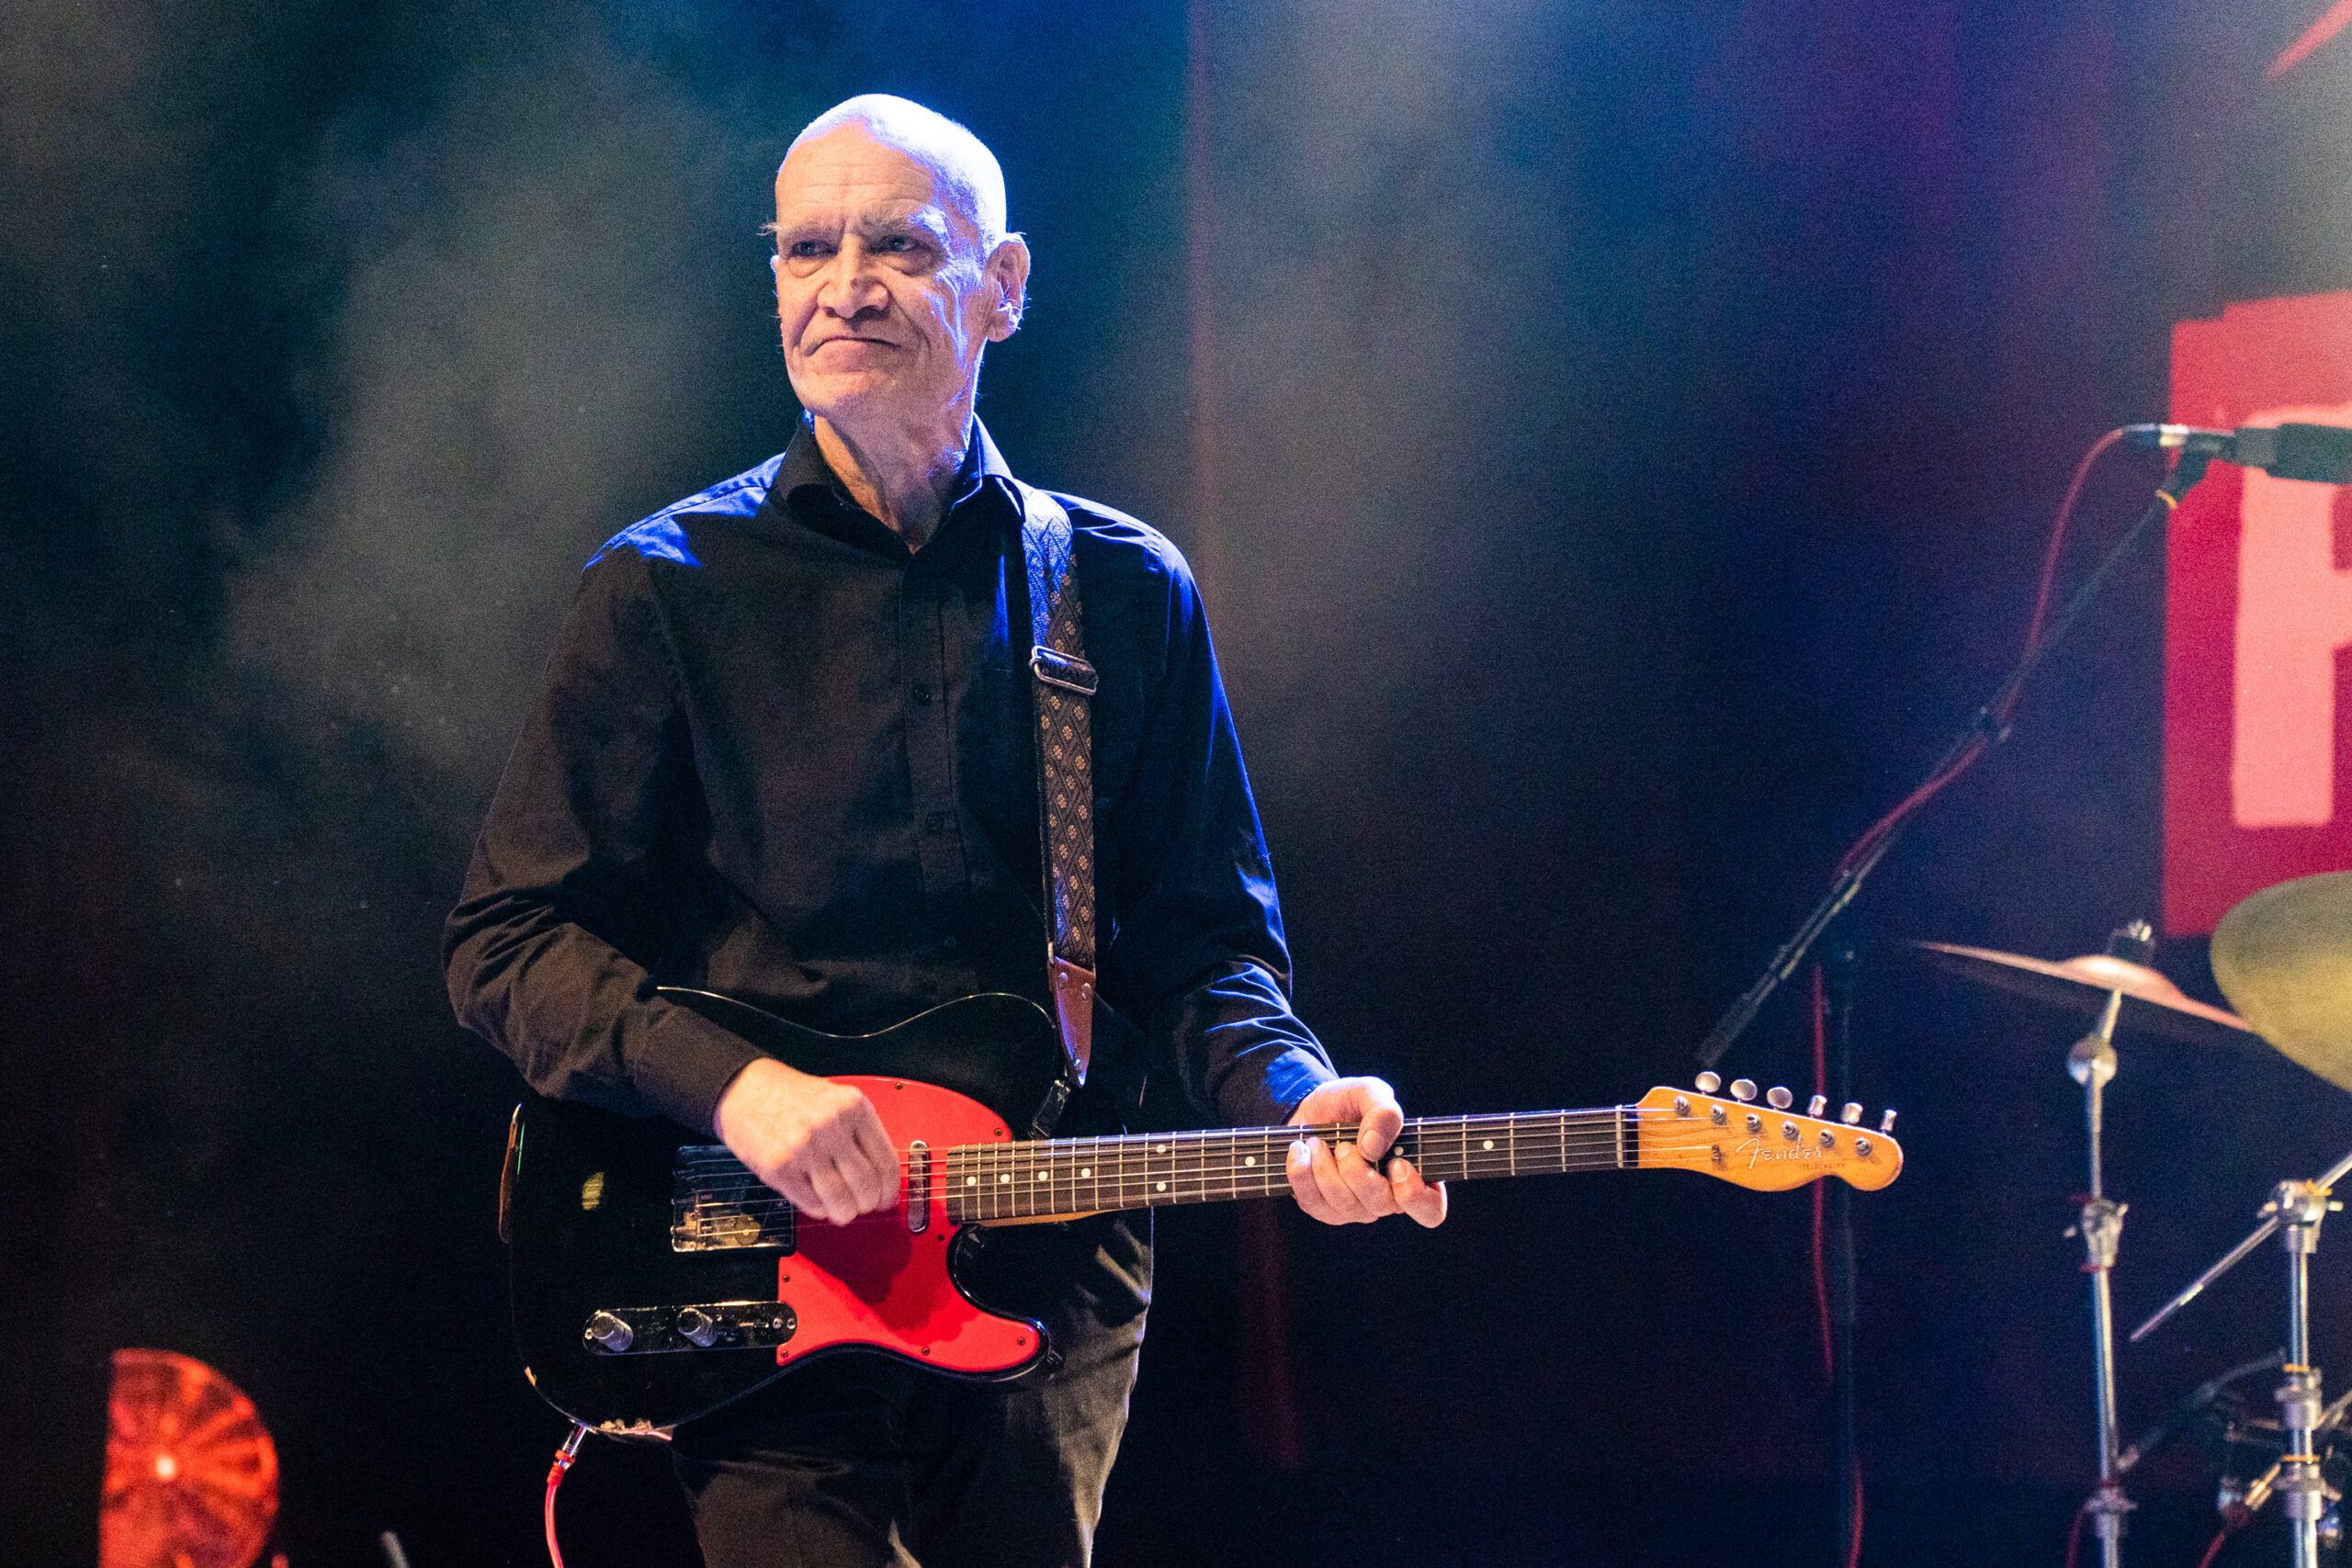 Wilko Johnson, Dr. Feelgood Guitarist and <i>Game of Thrones</i> Actor, Dies at 75